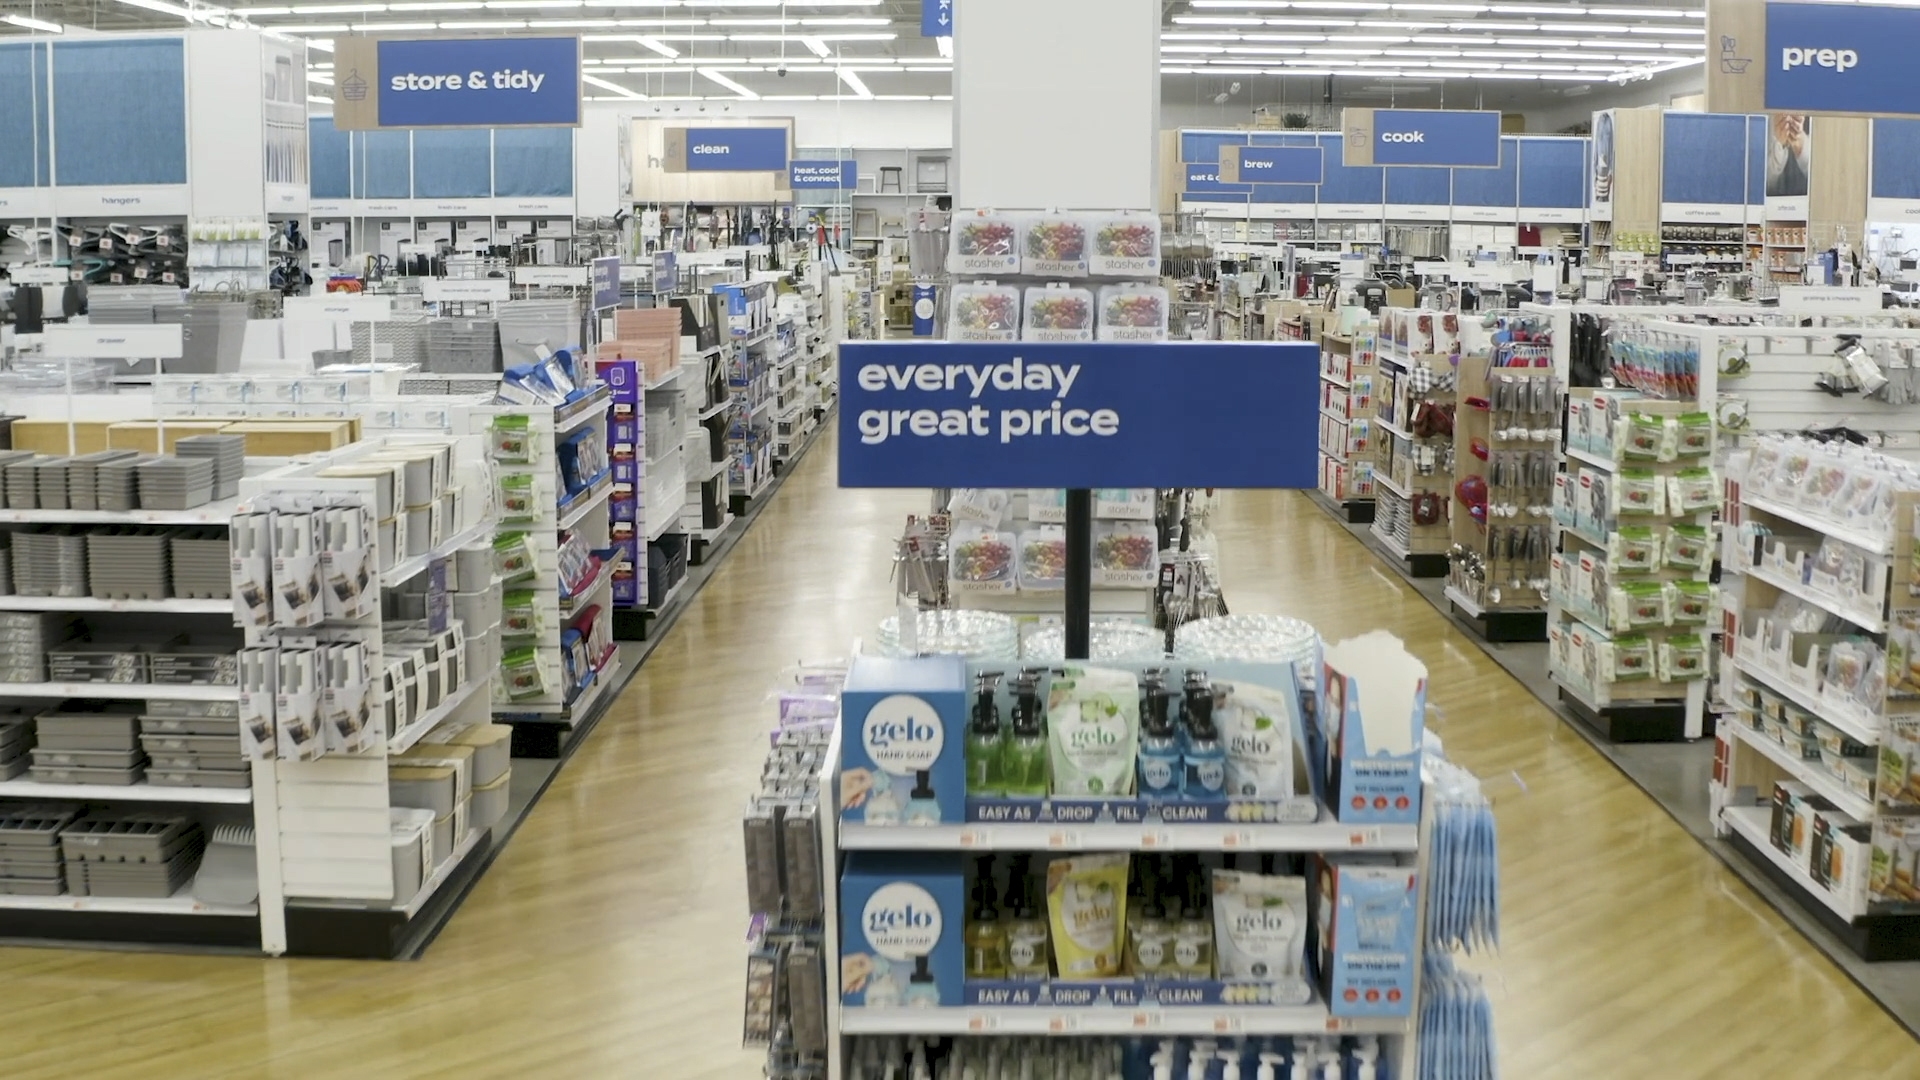 bed-bath-beyond-goes-with-something-new-to-revive-brand-wtop-news